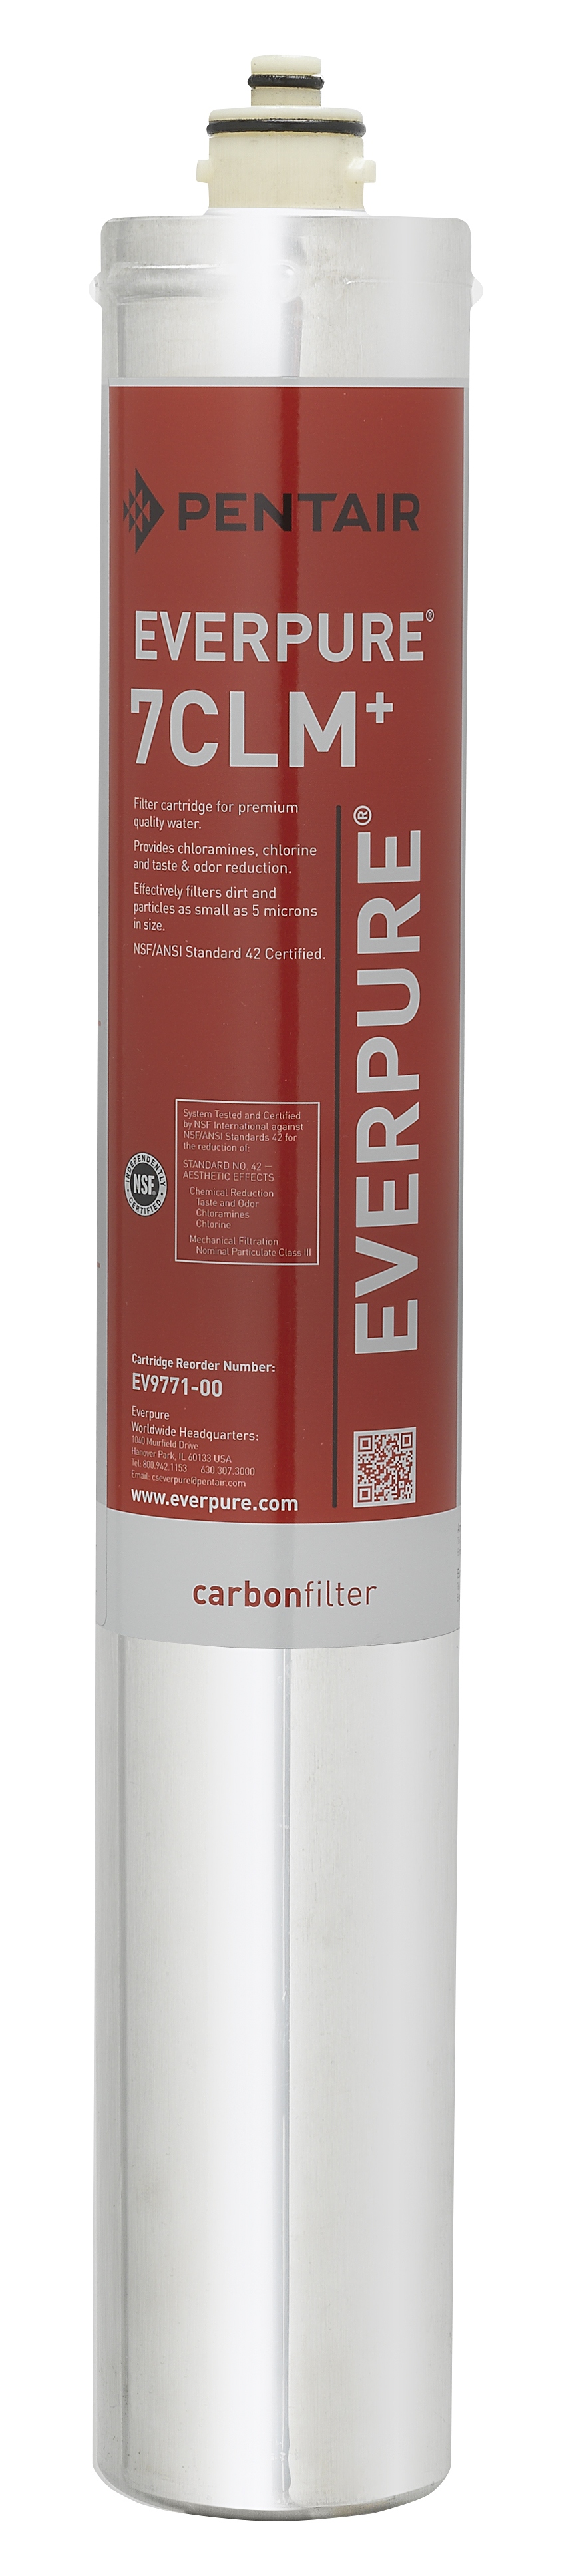 Everpure 7CLM+ Filter Cartridge for Water & Fountain Systems